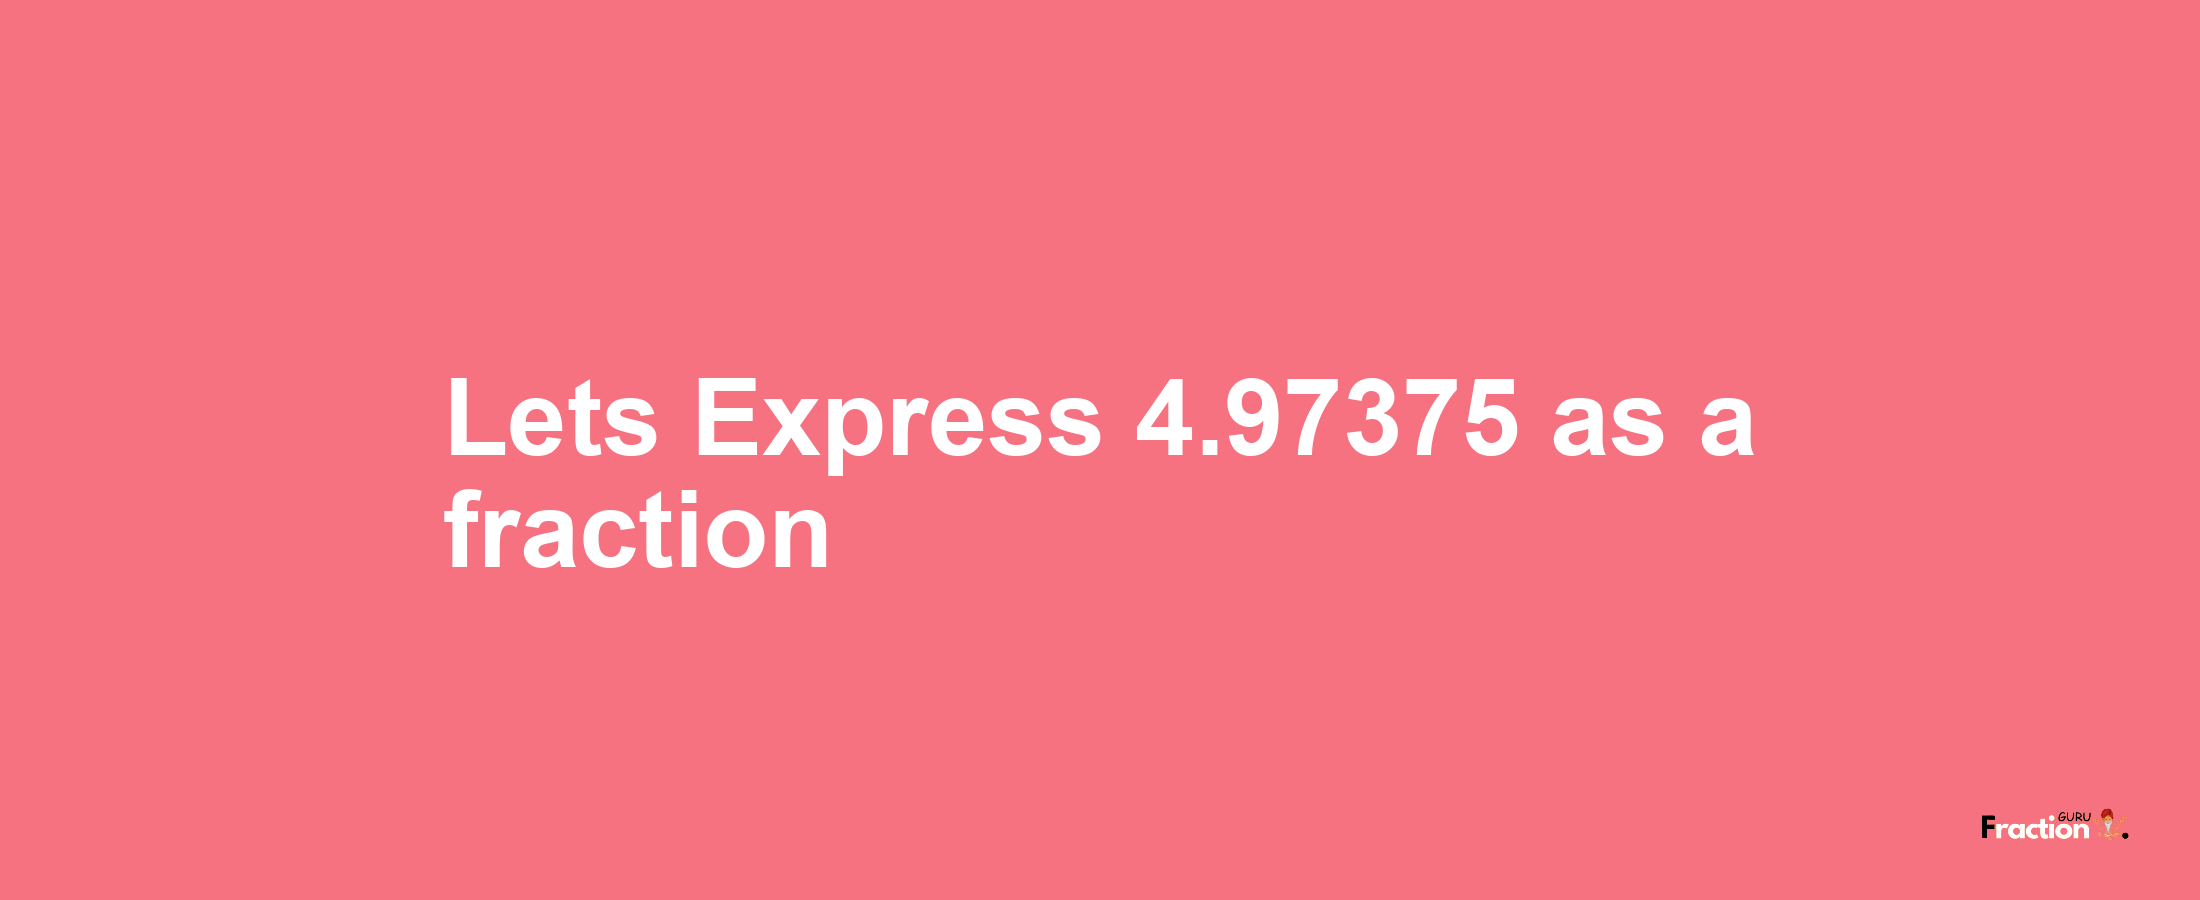 Lets Express 4.97375 as afraction